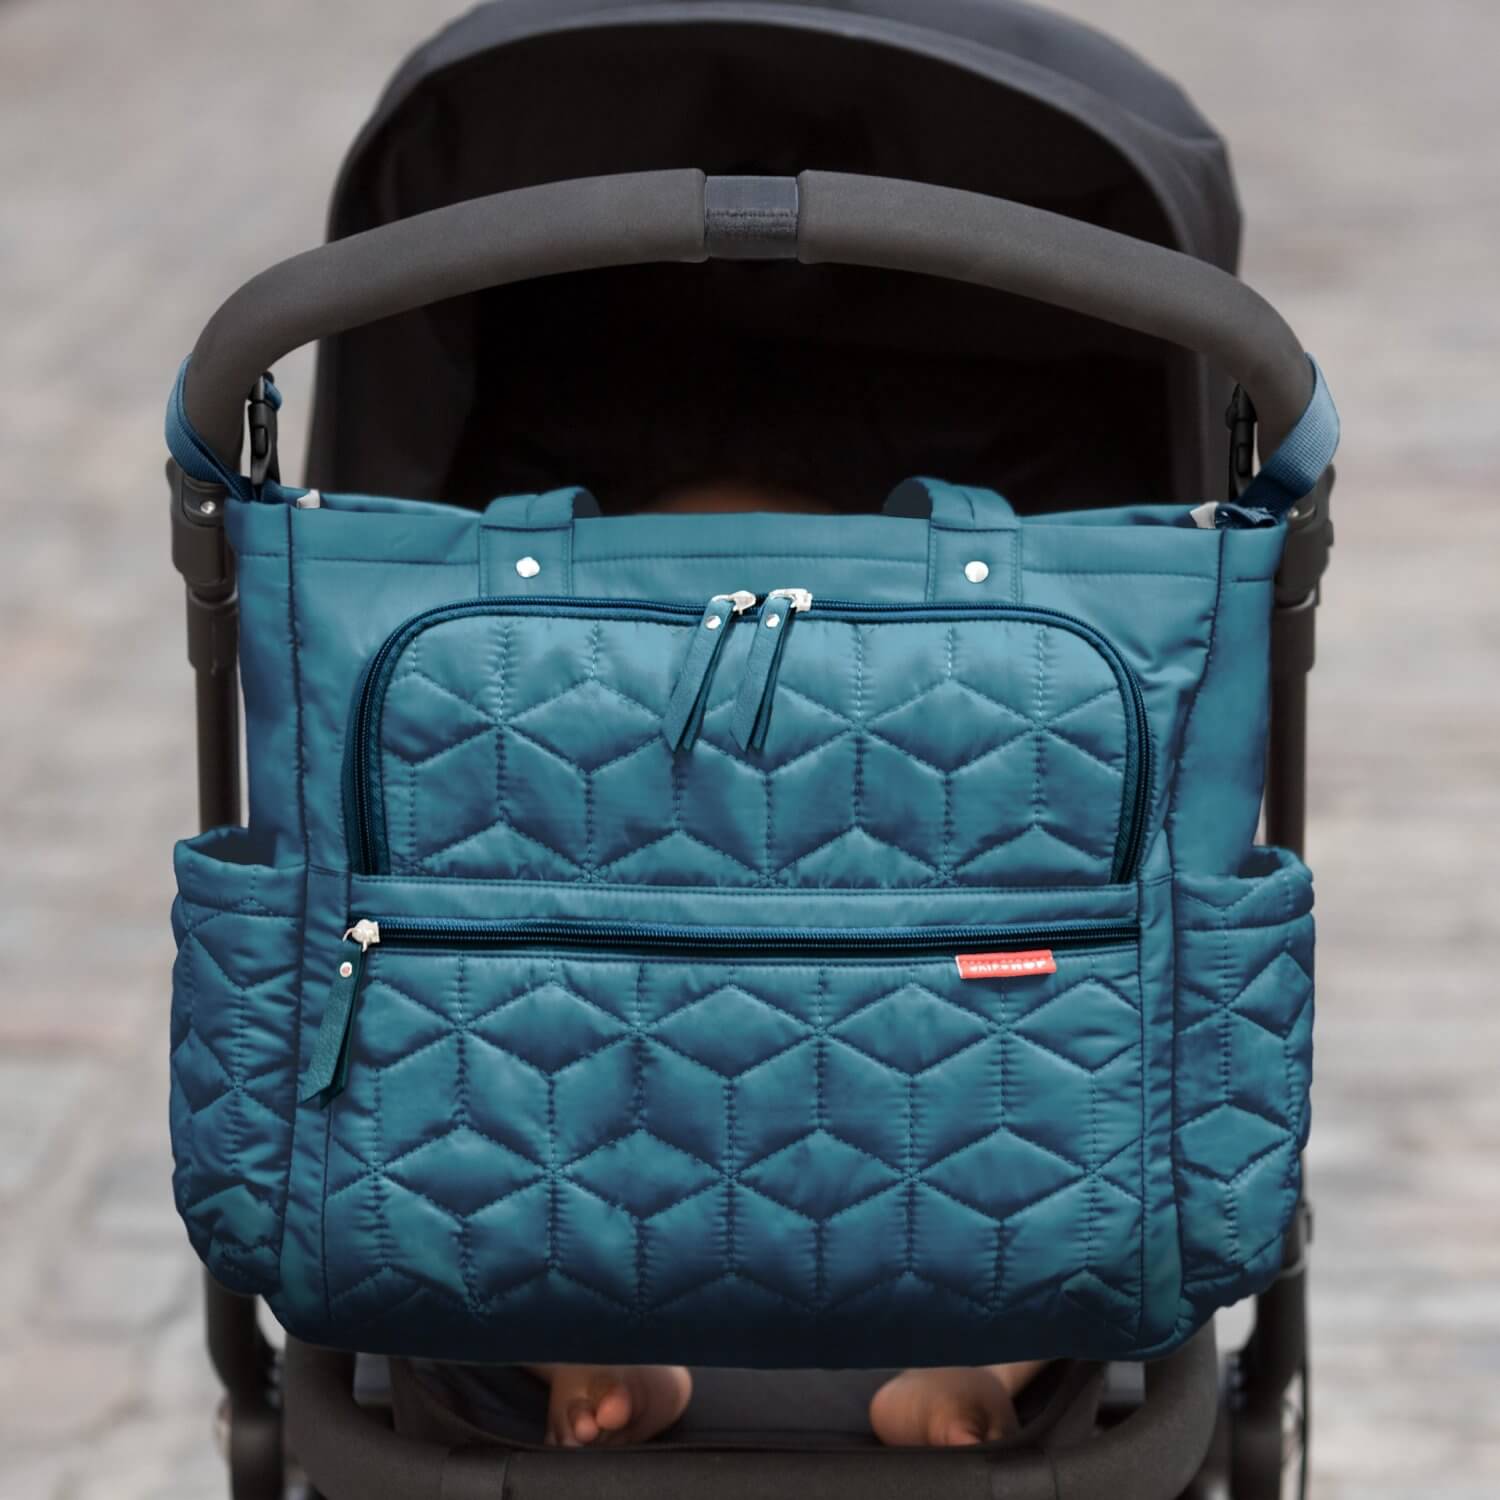 The 7 Best Diaper Bag for Cloth Diapers (For the Modern and Stylish Parents) - BabyDotDot - Baby ...